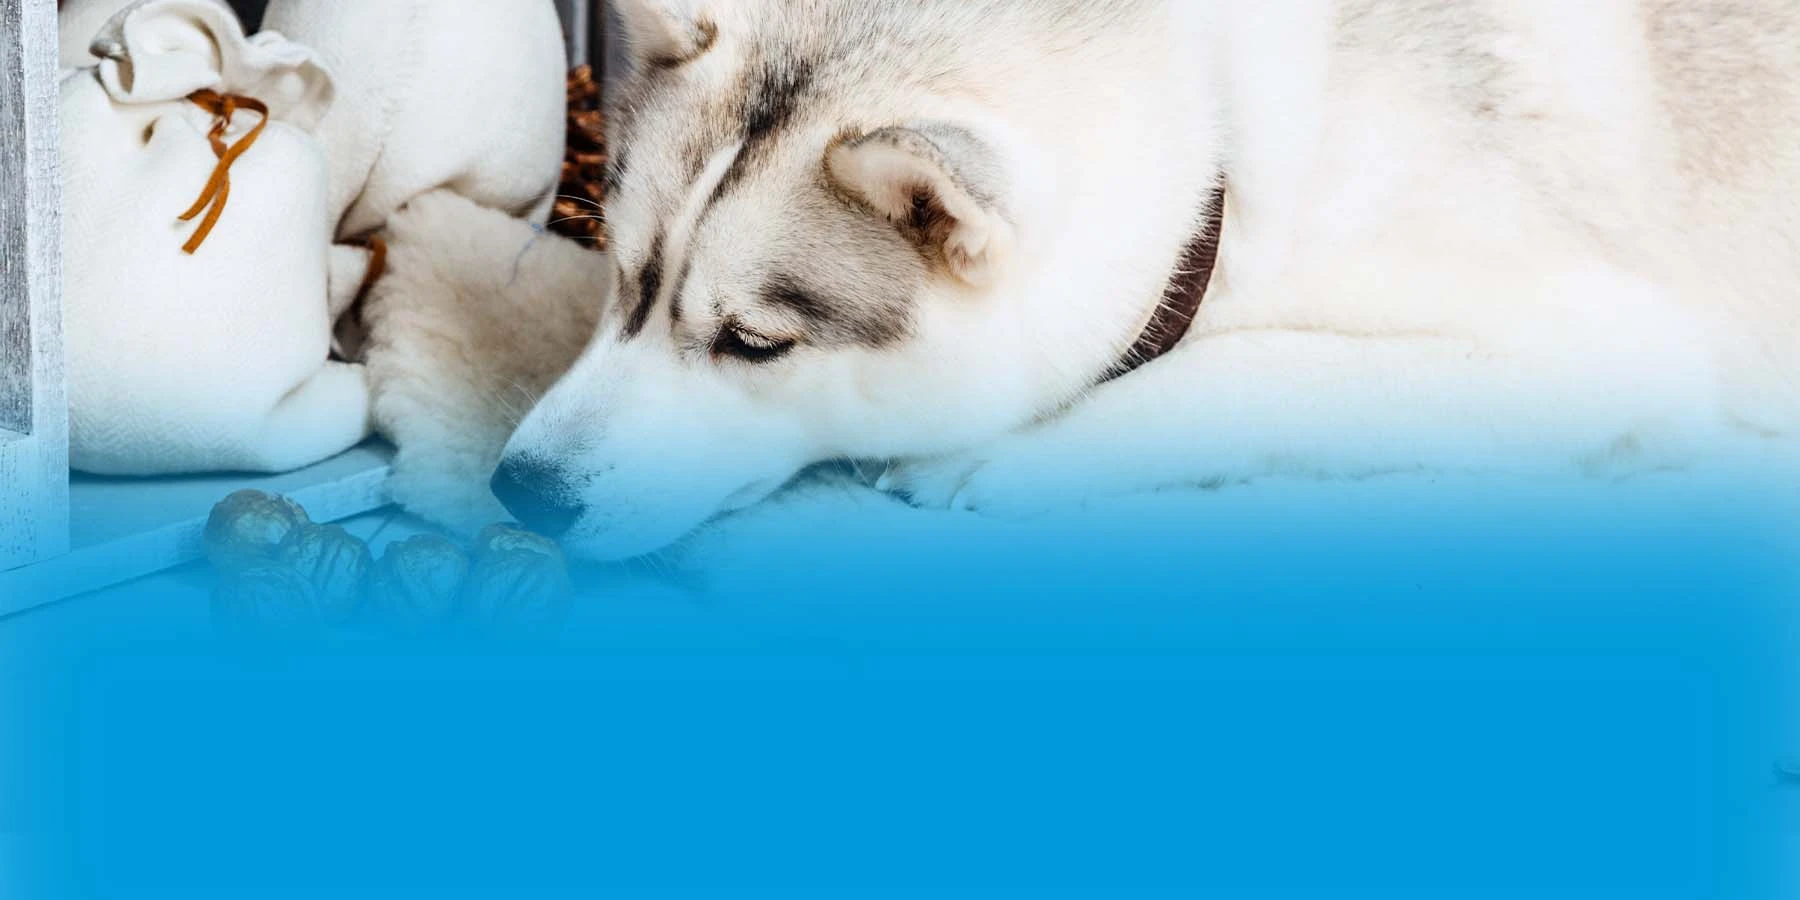 A white Husky sniffing uncracked walnuts.